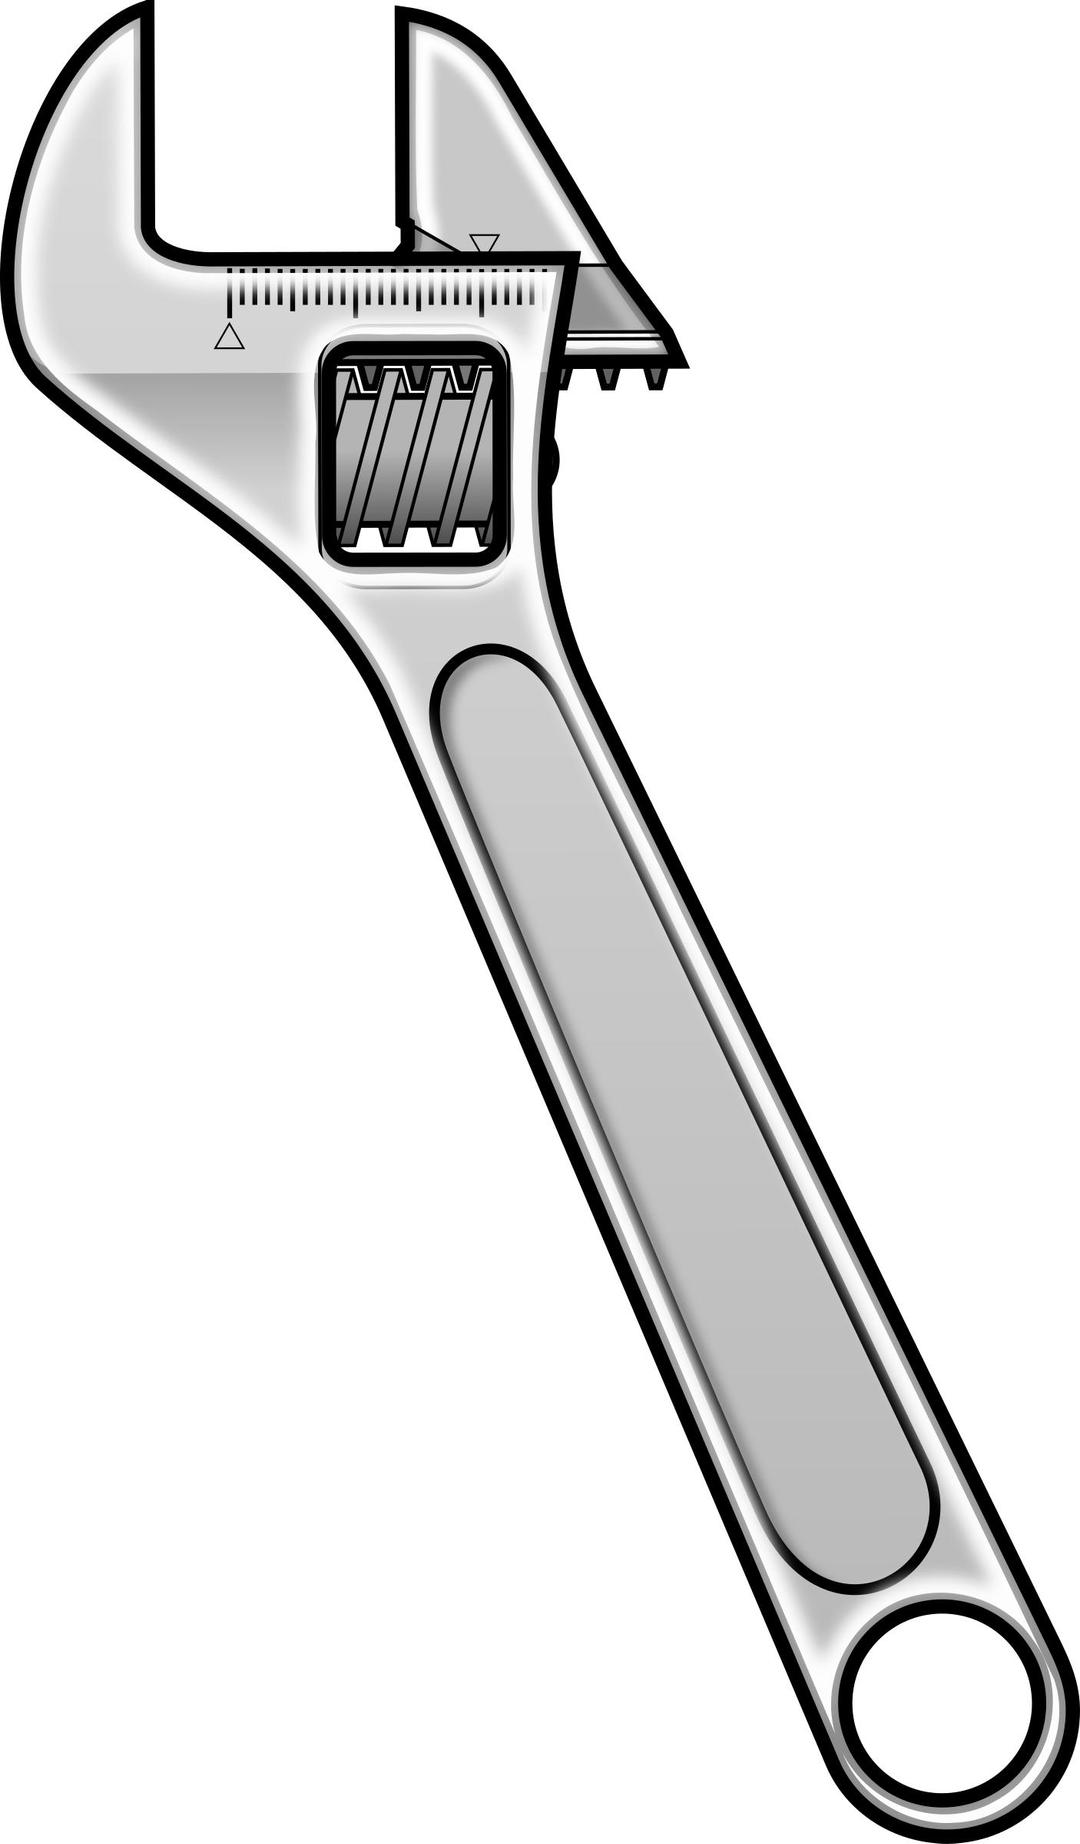 Adjustable wrench - icon style 1 png transparent